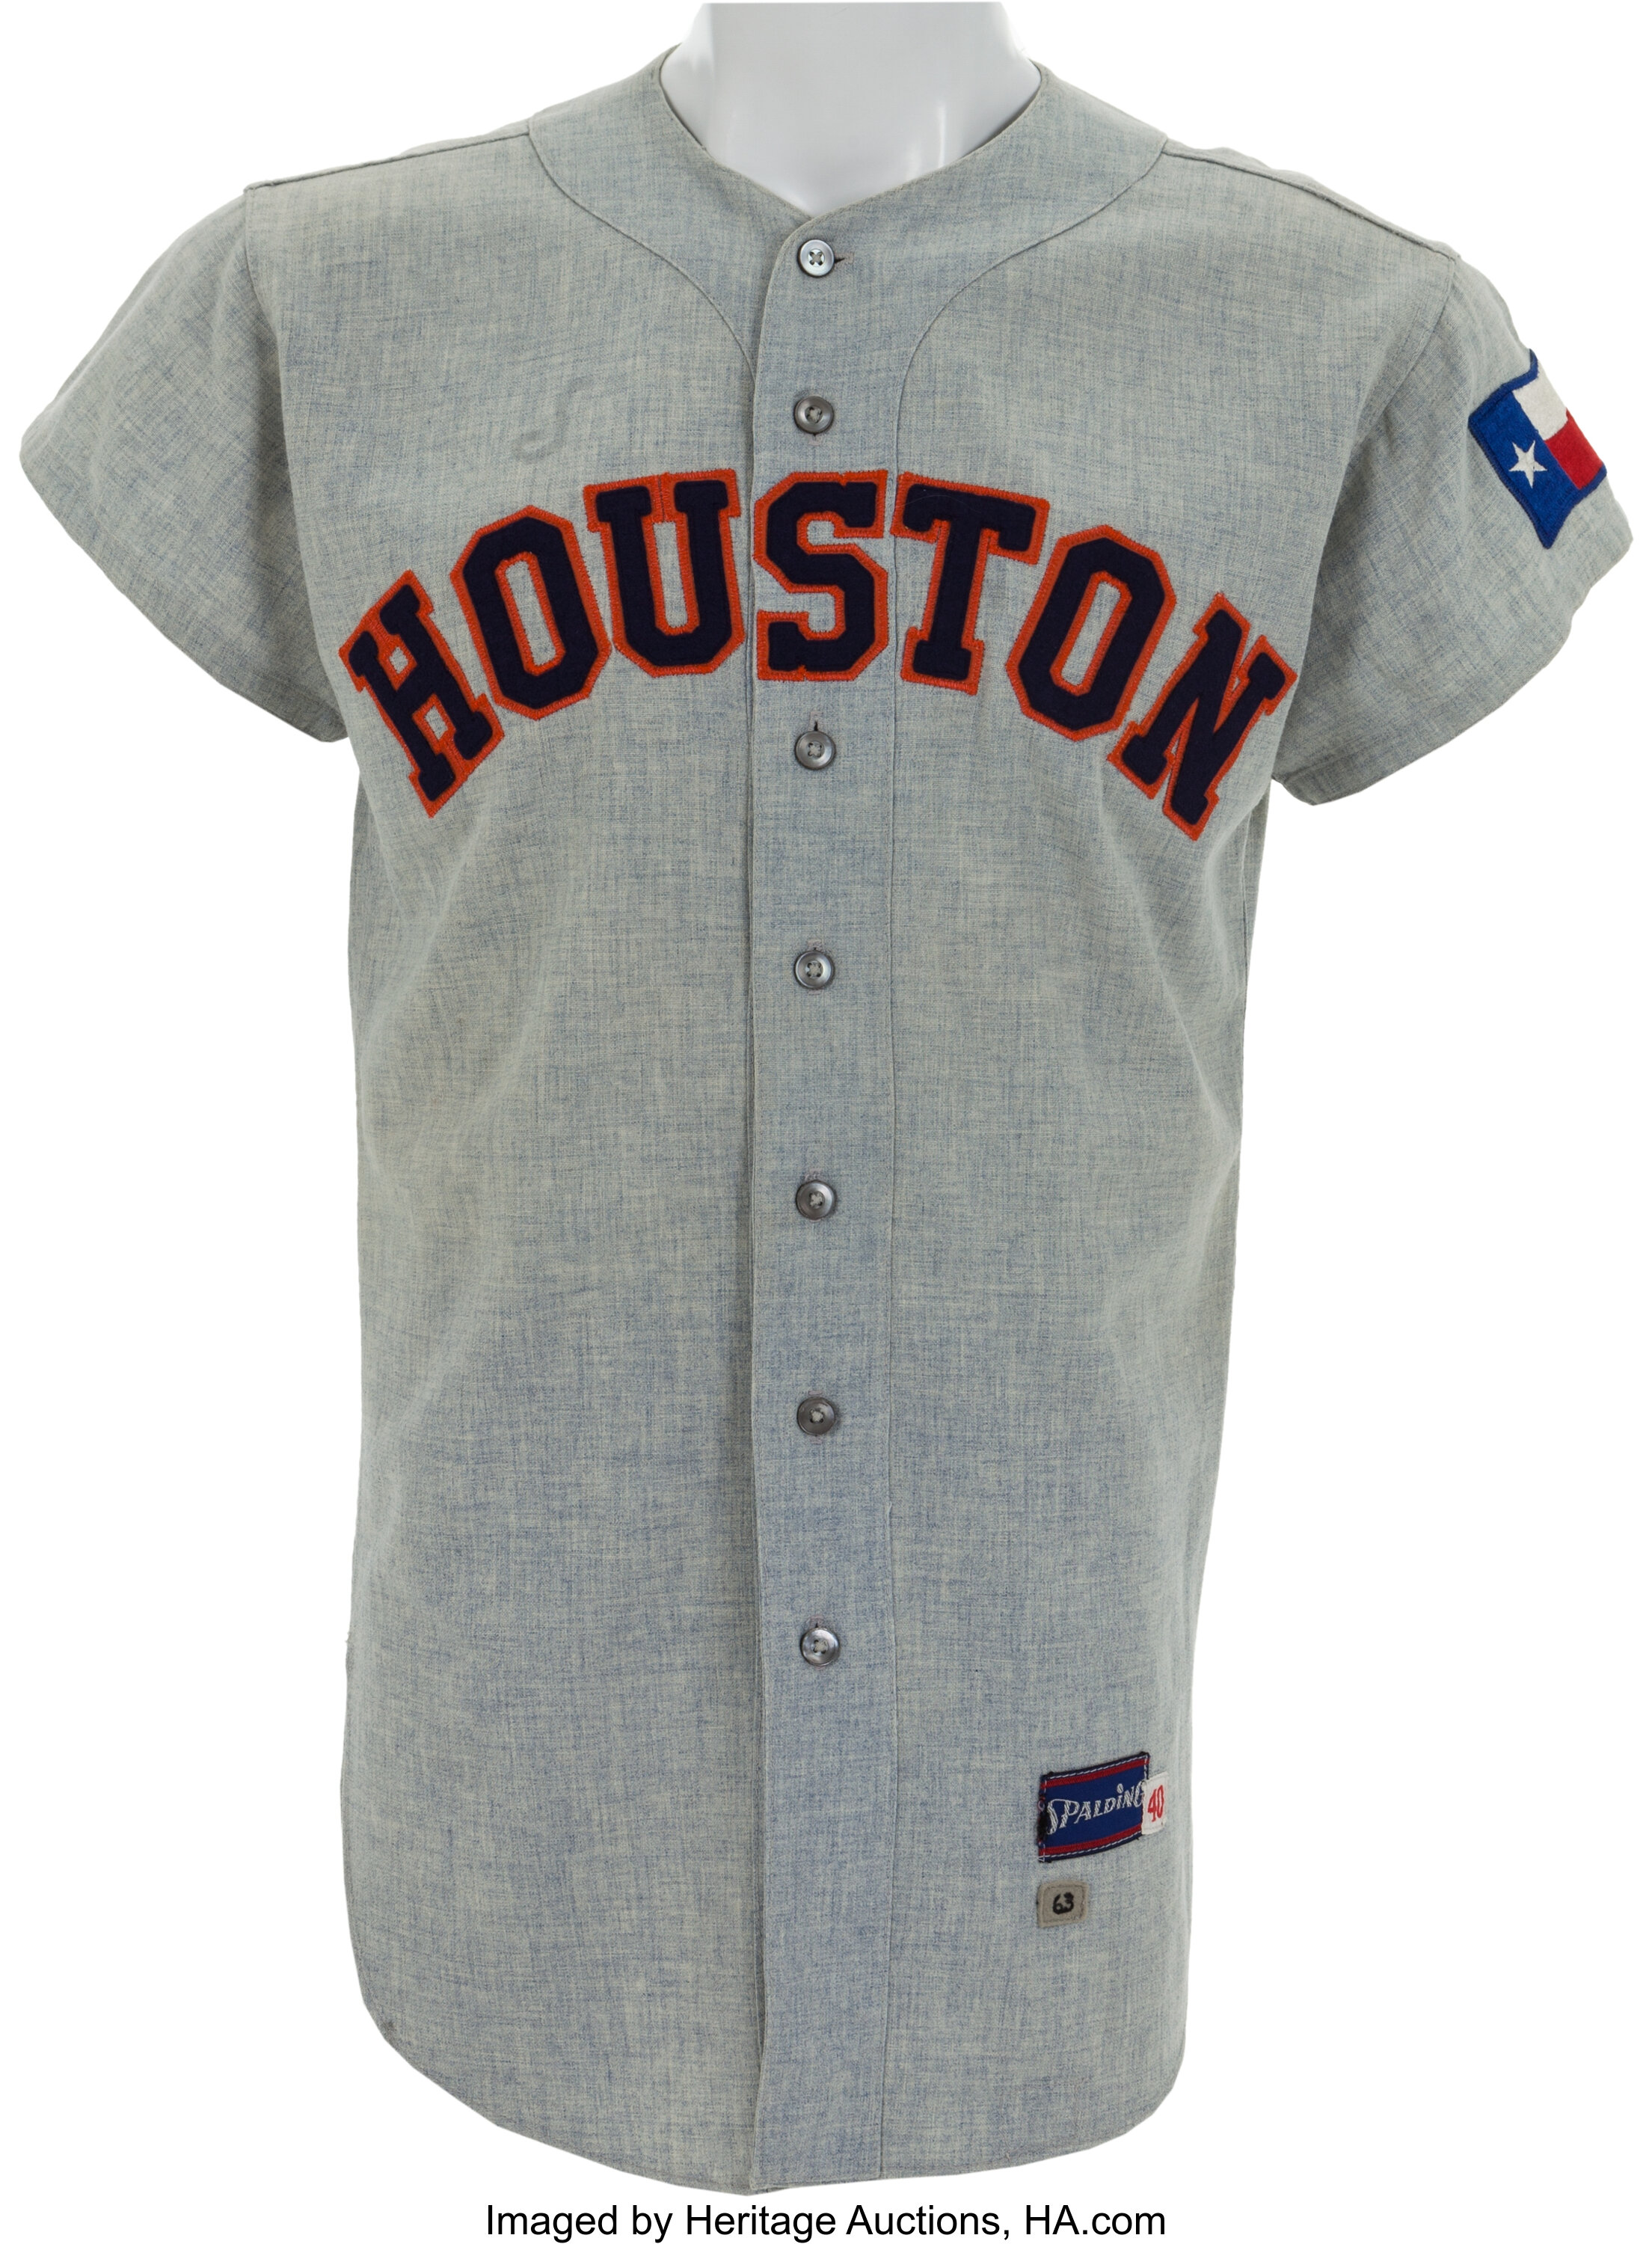 Houston Astros Wear Throwback Colt .45s Jerseys on Team's 50th Anniversary, News, Scores, Highlights, Stats, and Rumors